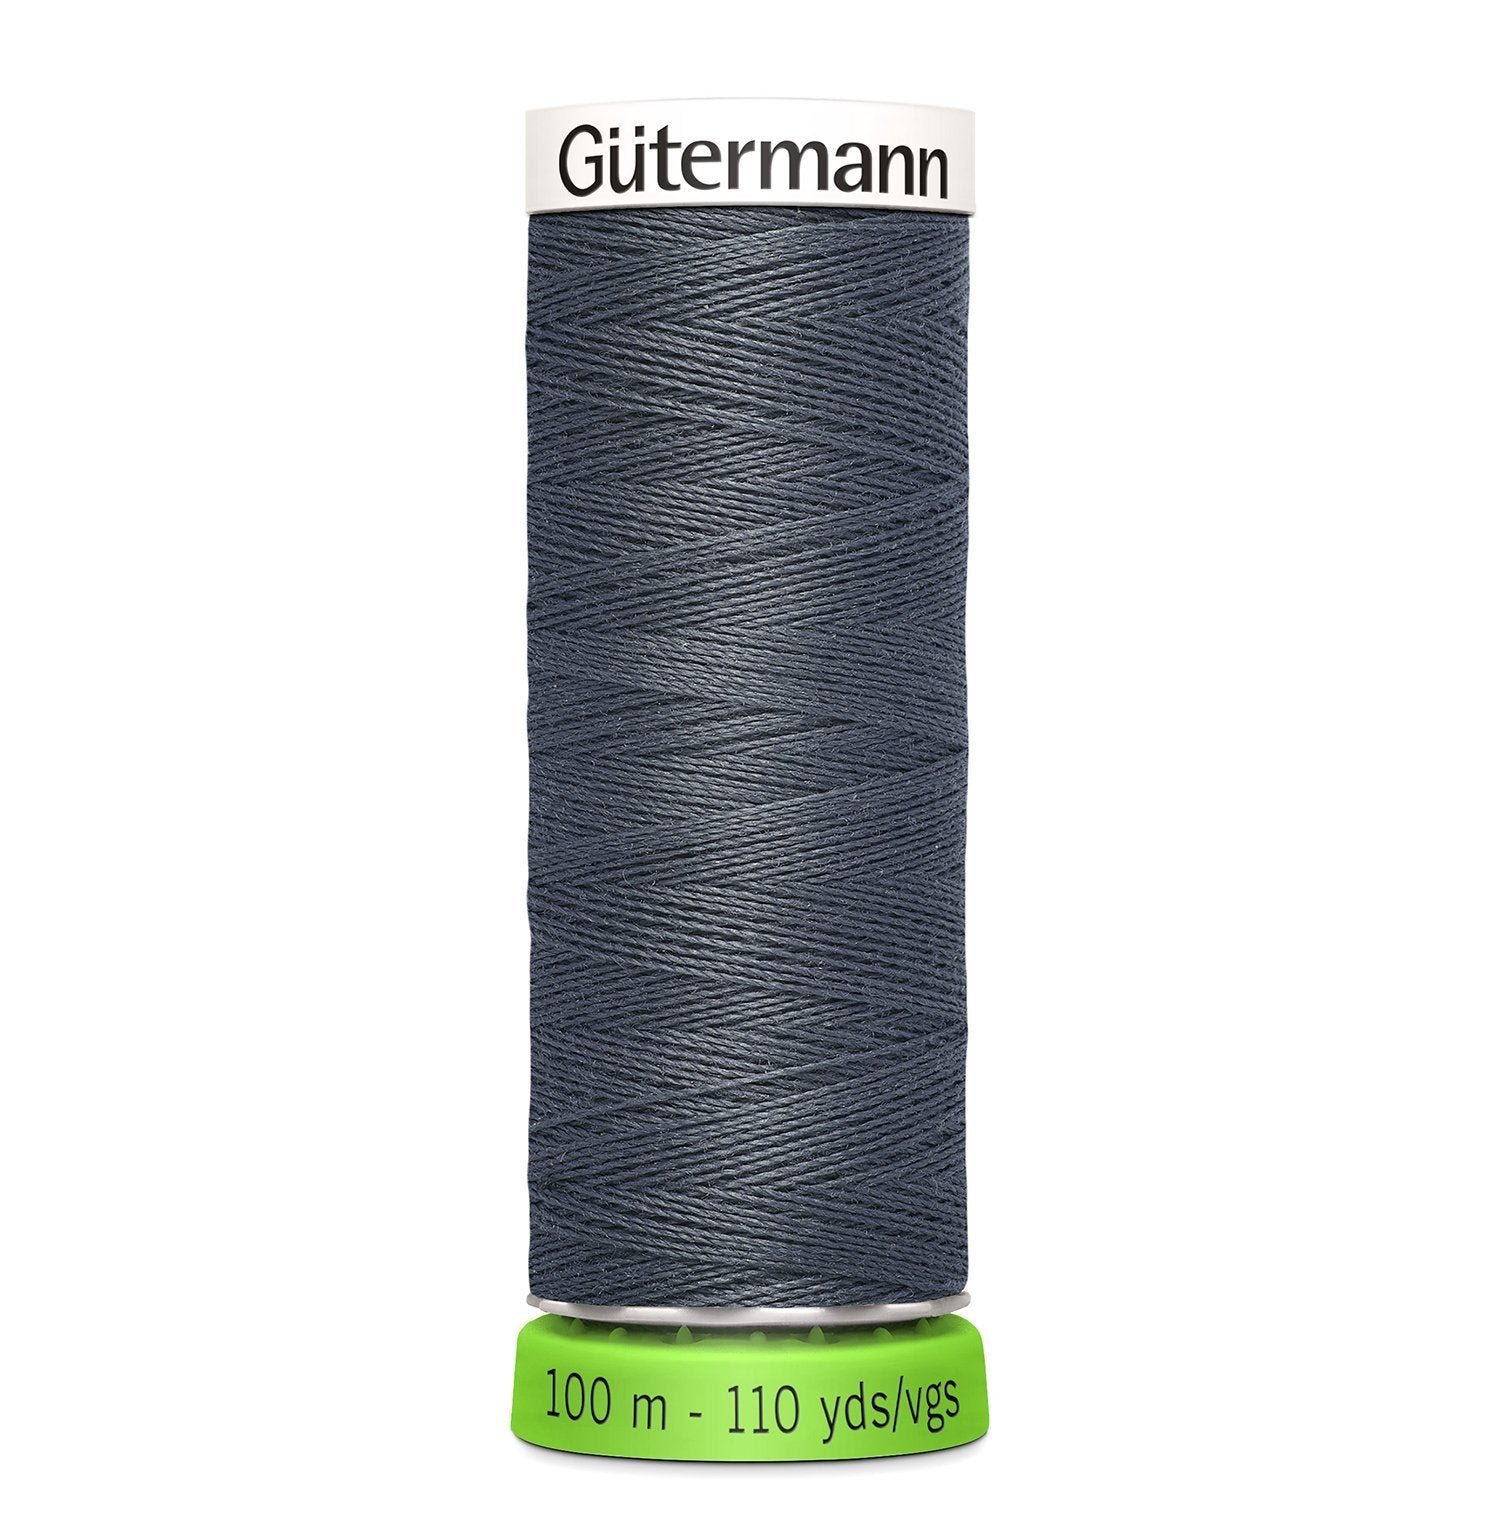 Gutermann Recycled Thread 100m, Colour 93 from Jaycotts Sewing Supplies